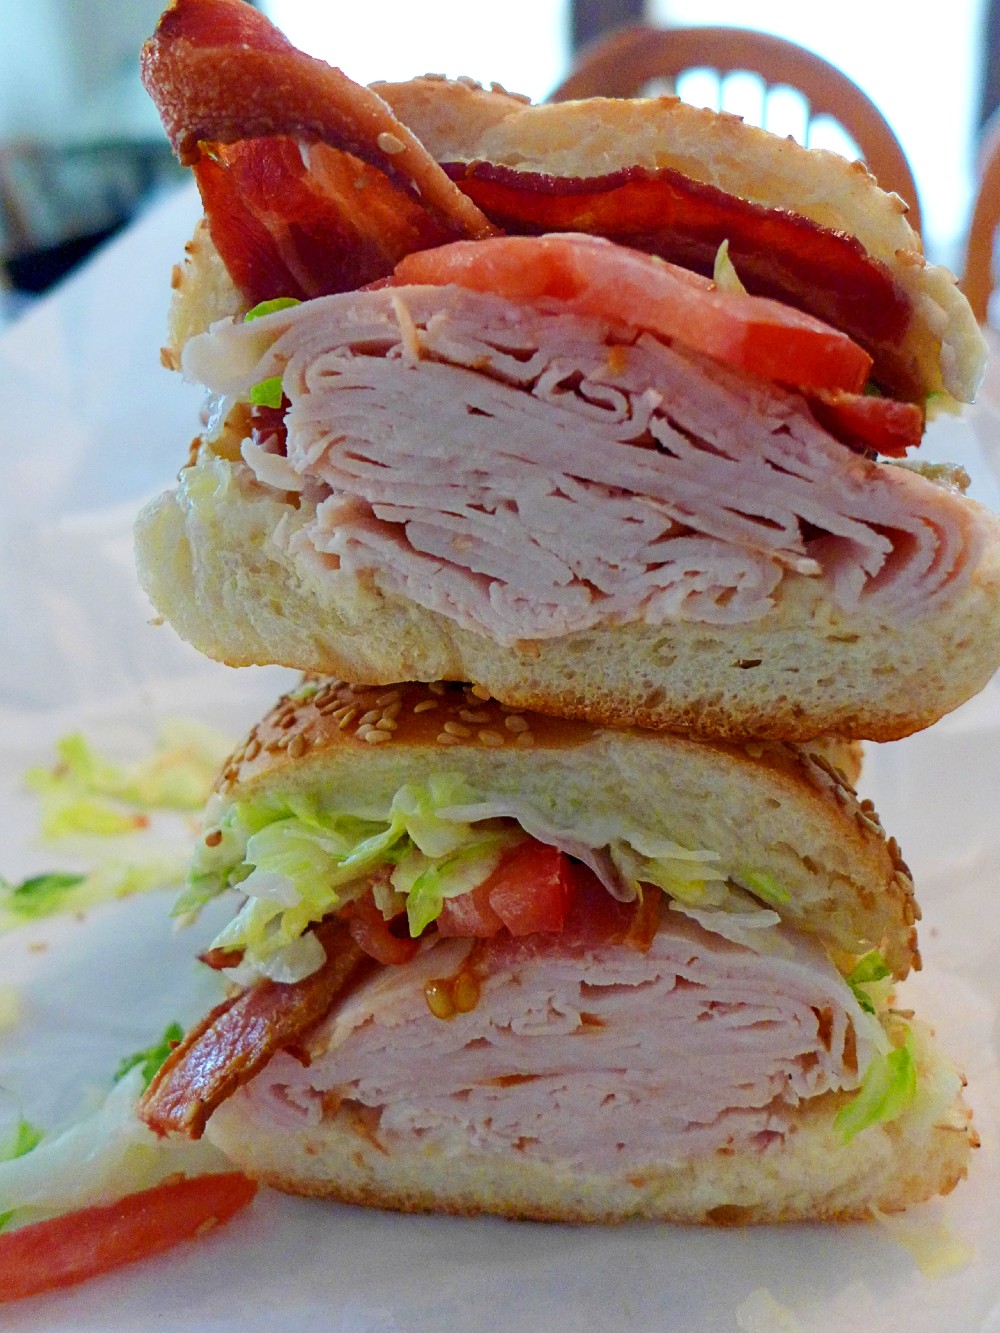 The TLBT: turkey, lettuce and tomato on a braided sesame roll from the Good Food Store & Deli in Walpole, Massachusetts